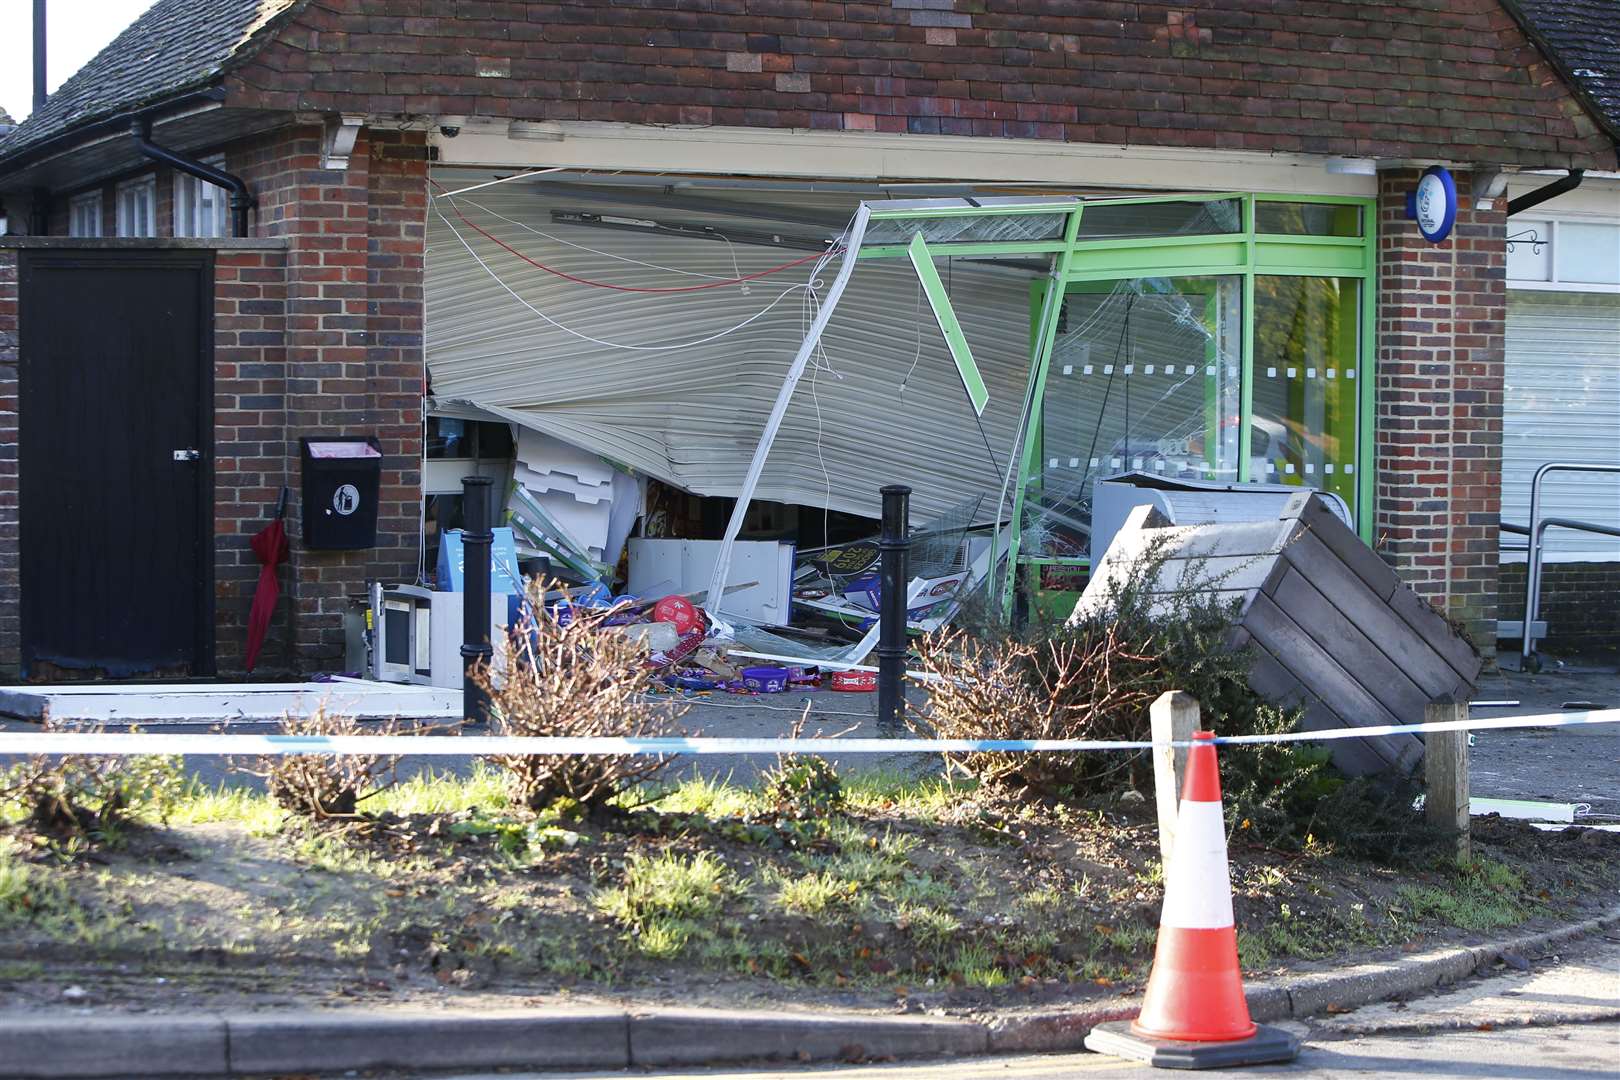 The shop front has been heavily damaged. Picture: Andy Jones